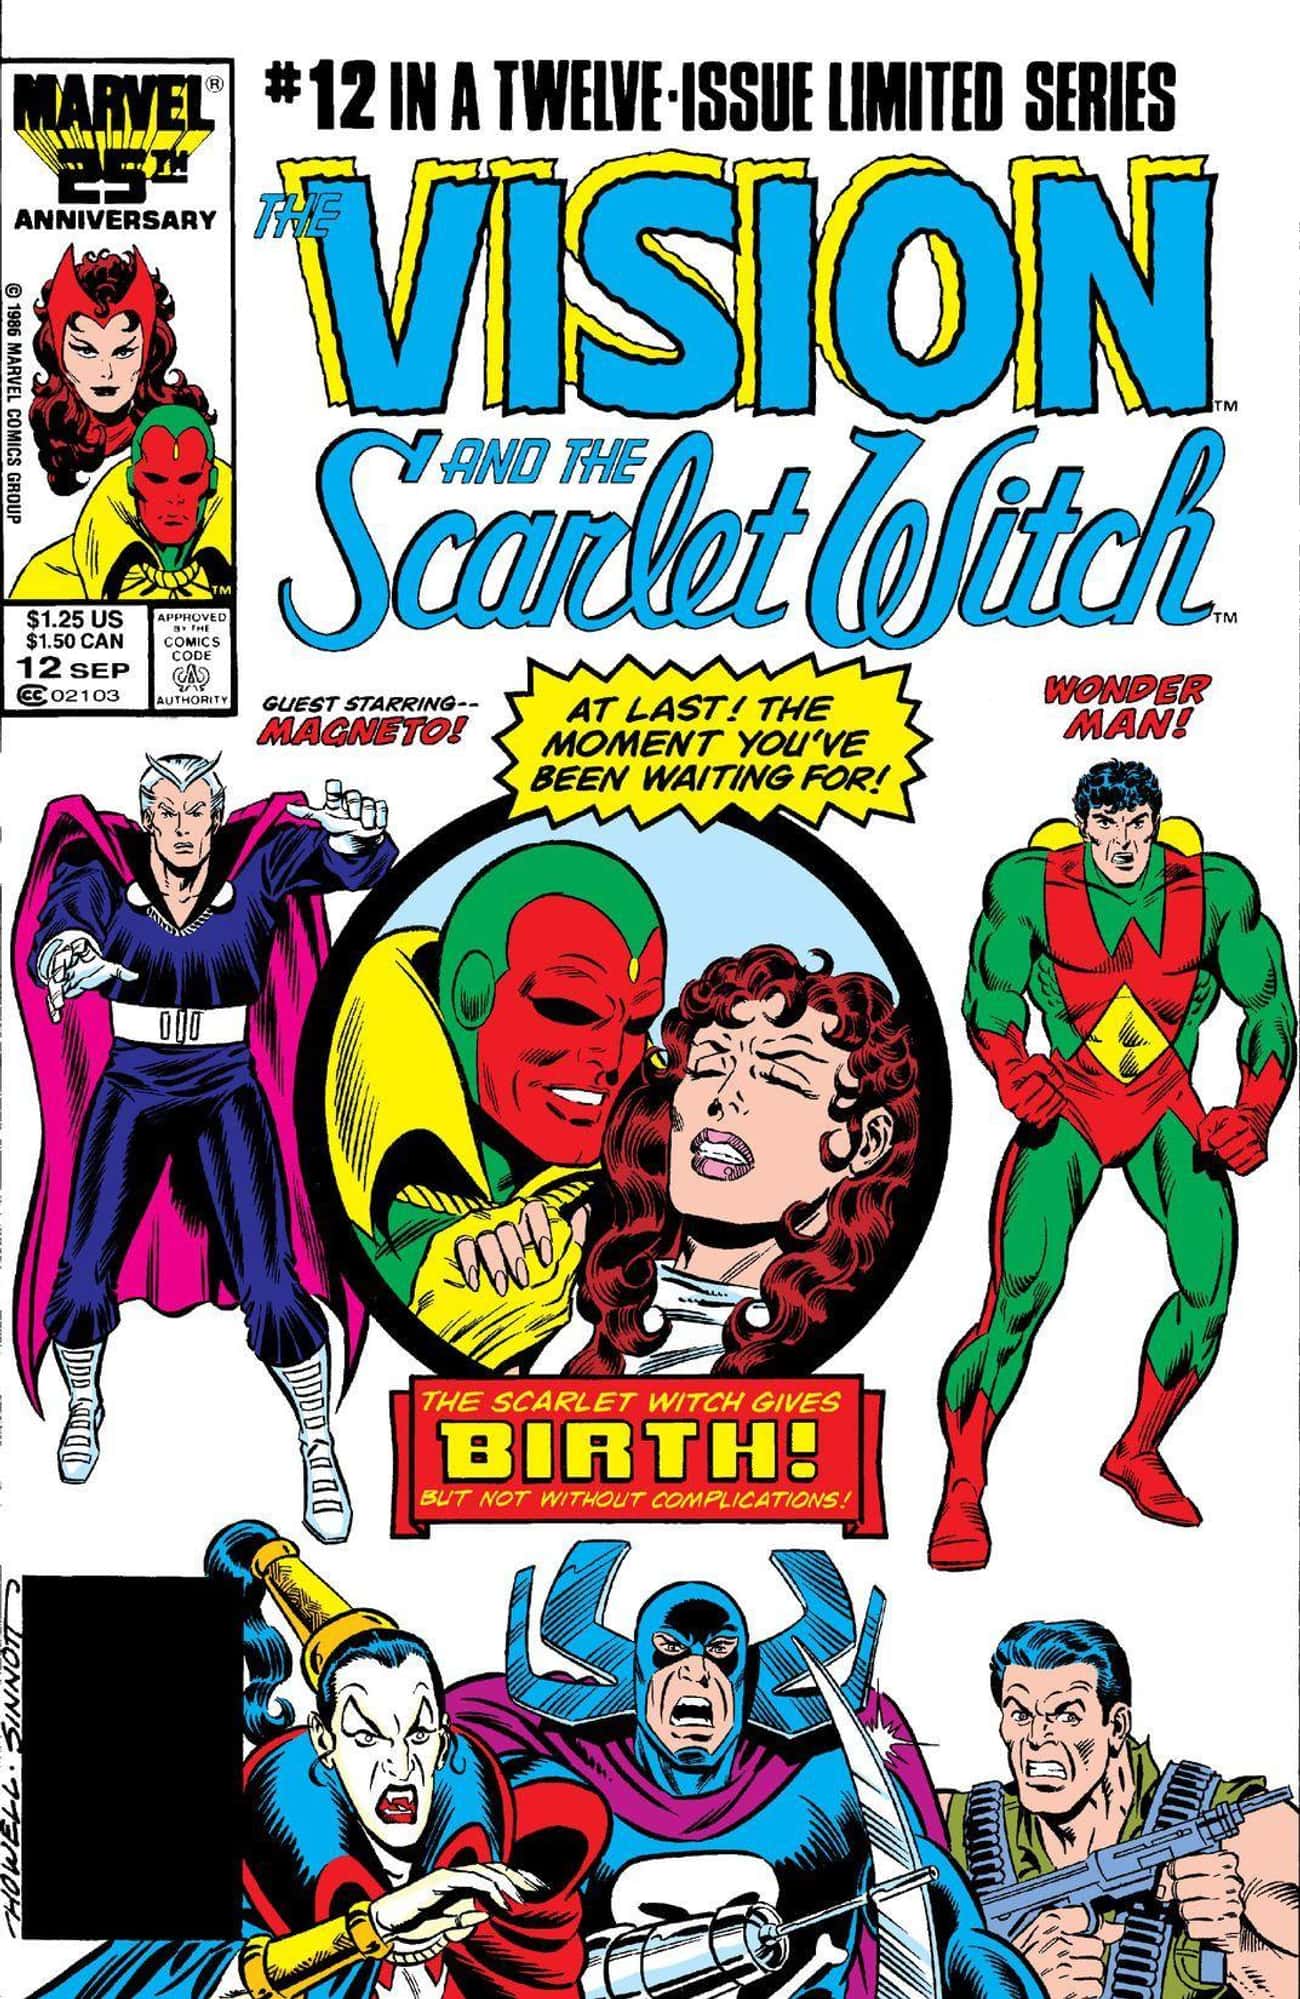 When Wanda Maximoff Announces Her And The Vision’s Pregnancy, It Comes As A Surprise - Mostly Because Vision Is A Robot